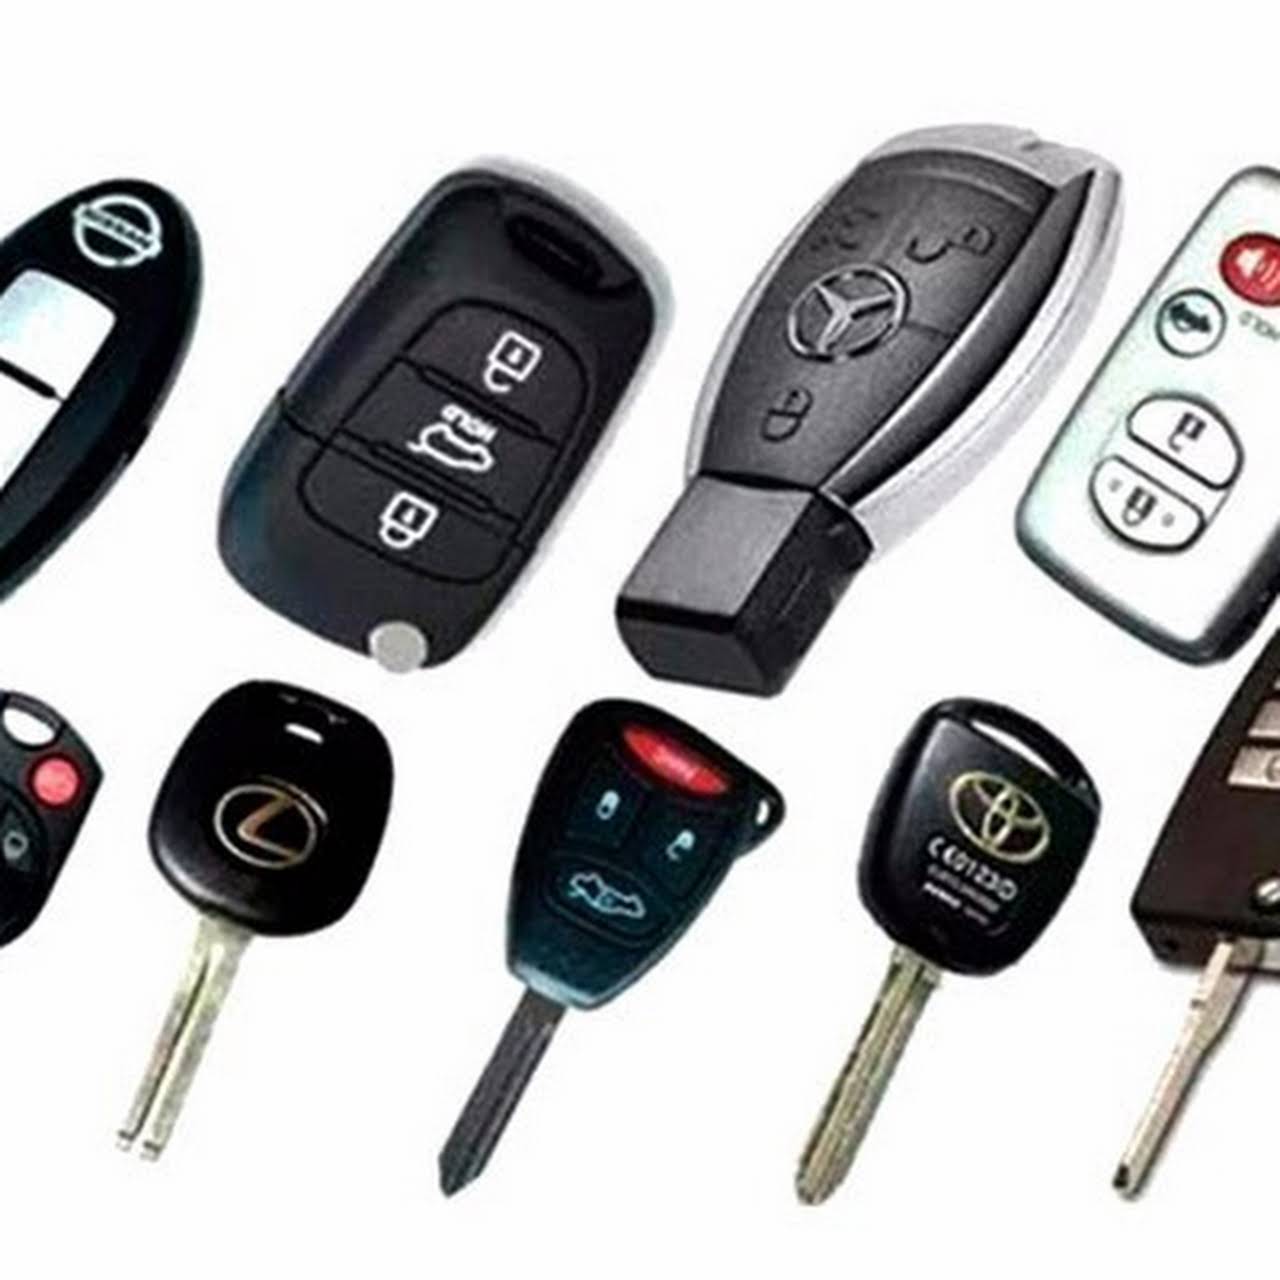 Importance Of Hiring The Best Car Key Cutting Services